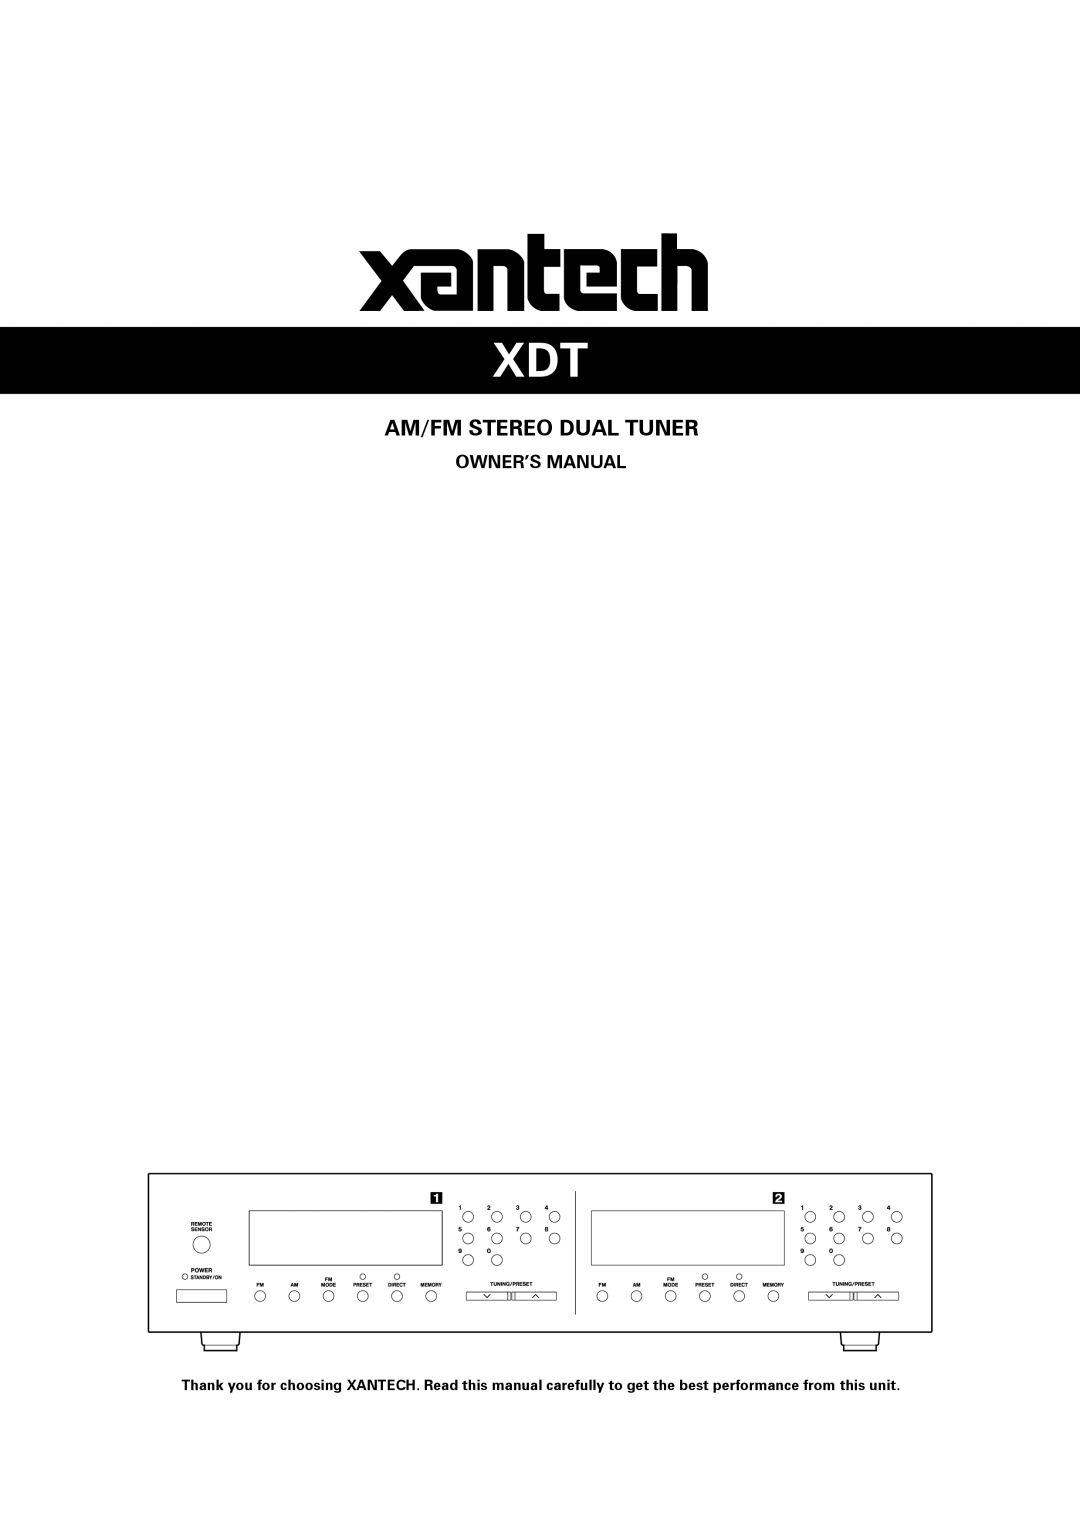 Xantech AM/FM Radio Tuner owner manual amOfm@stereo@dual@tuner 